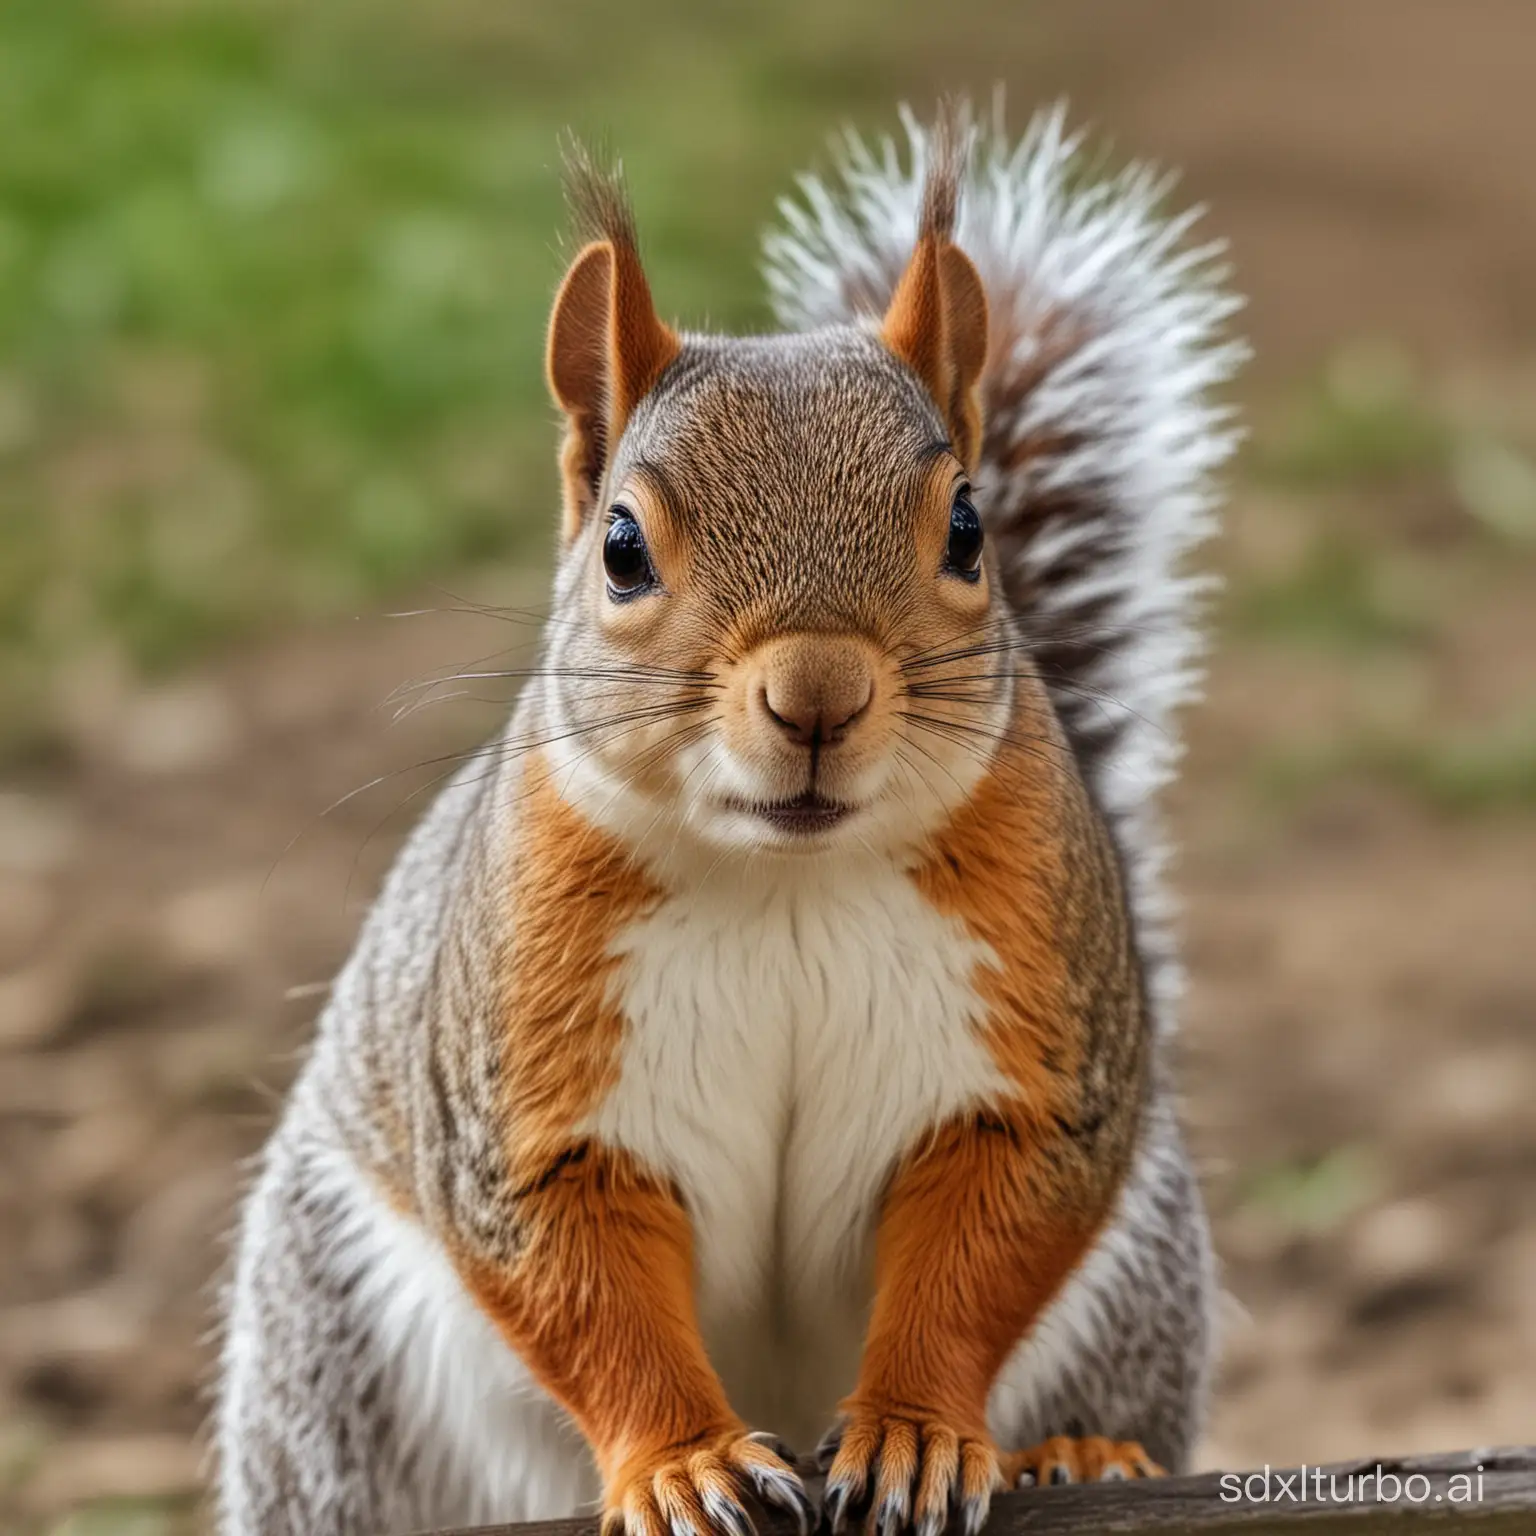 a squirrel in a park, portrait, nature, photography,